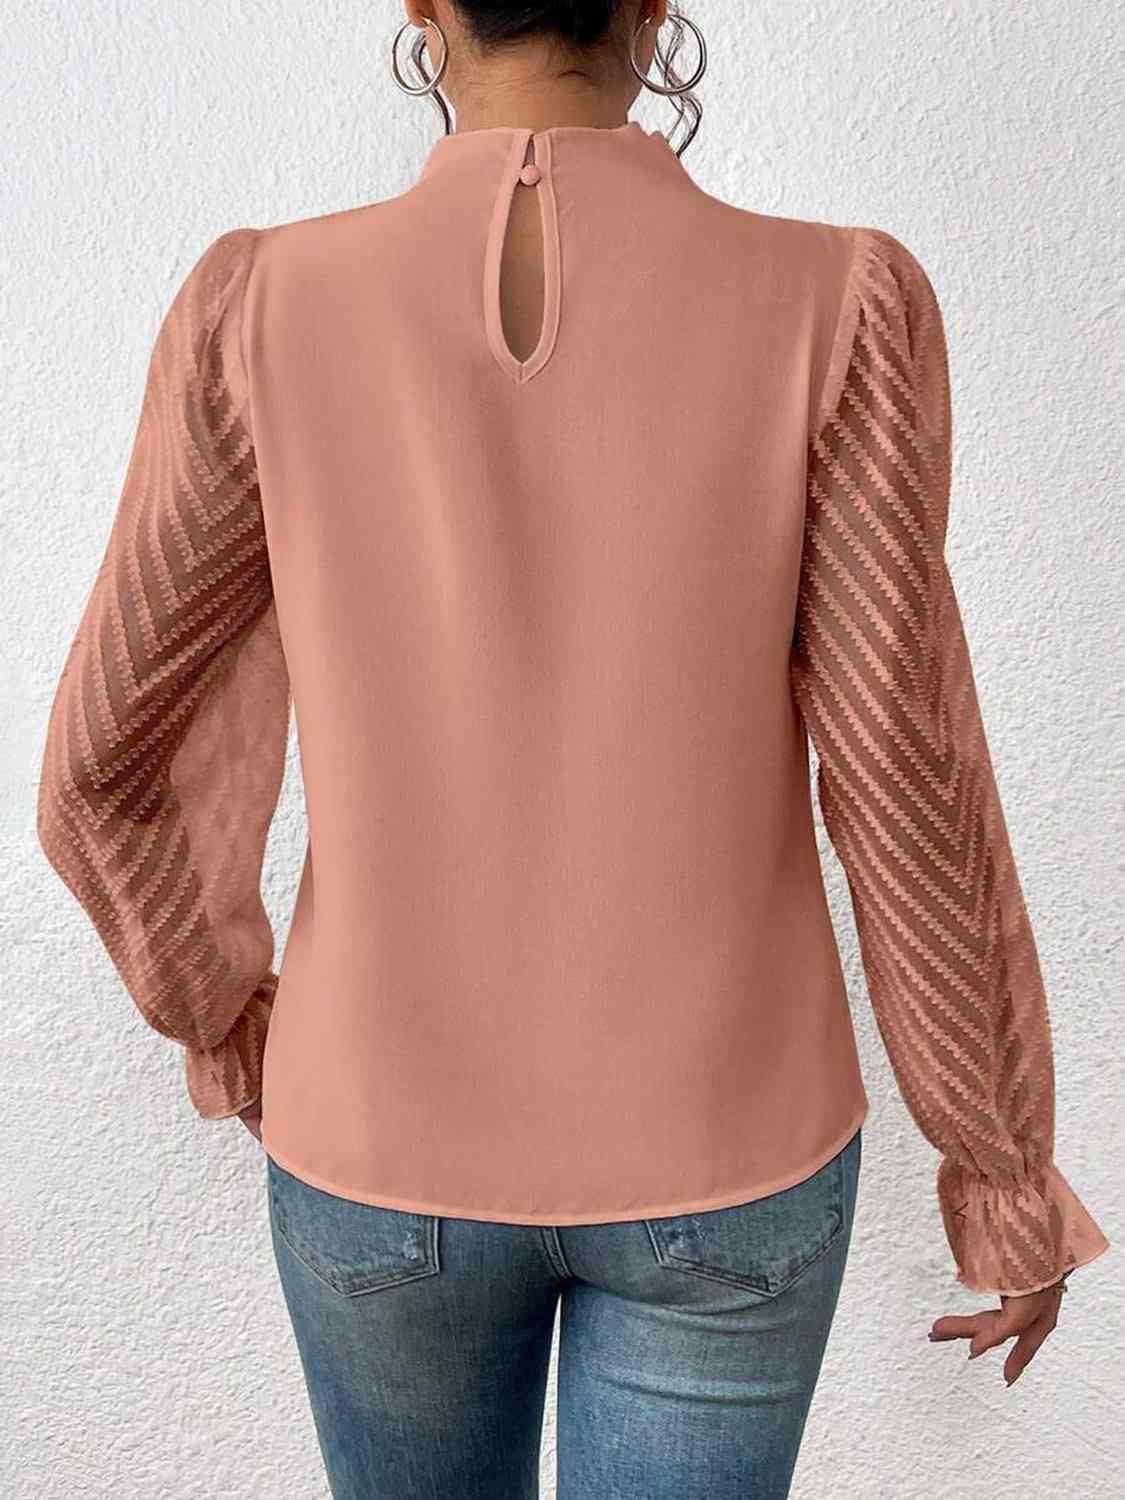 Mock Neck Flounce Sleeve Blouse - Women’s Clothing & Accessories - Shirts & Tops - 12 - 2024